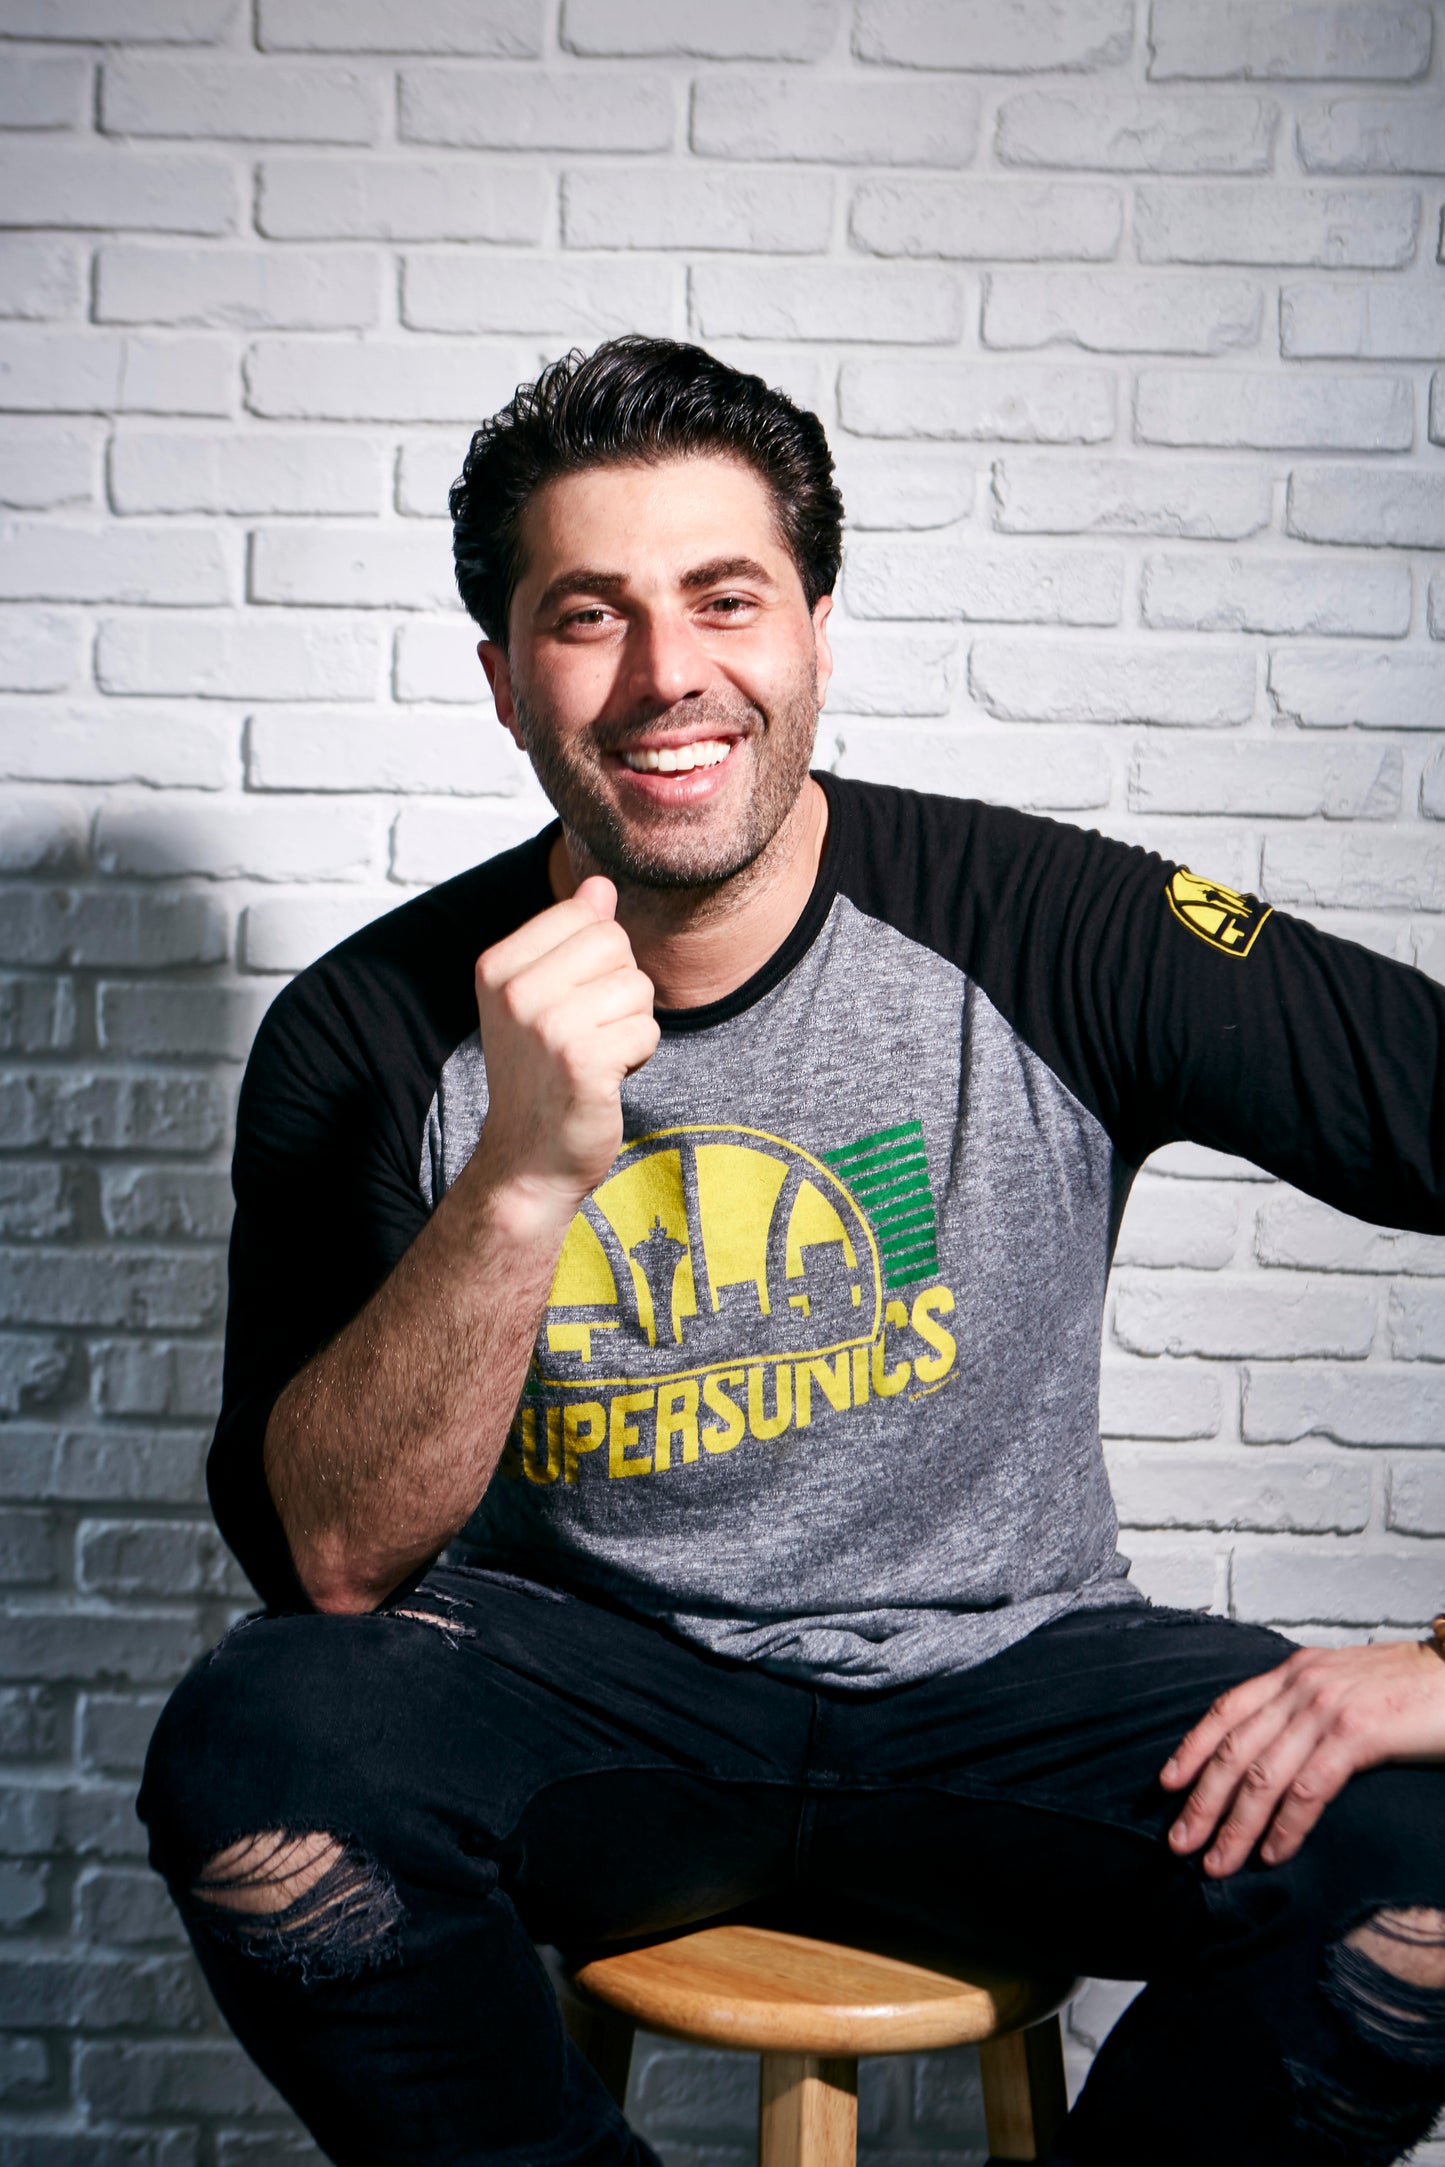 ADAM RAY FROM BARBIE AND NBC'S YOUNG ROCK (THUR 3/28, FRI 3/29 + SAT 3/30)!